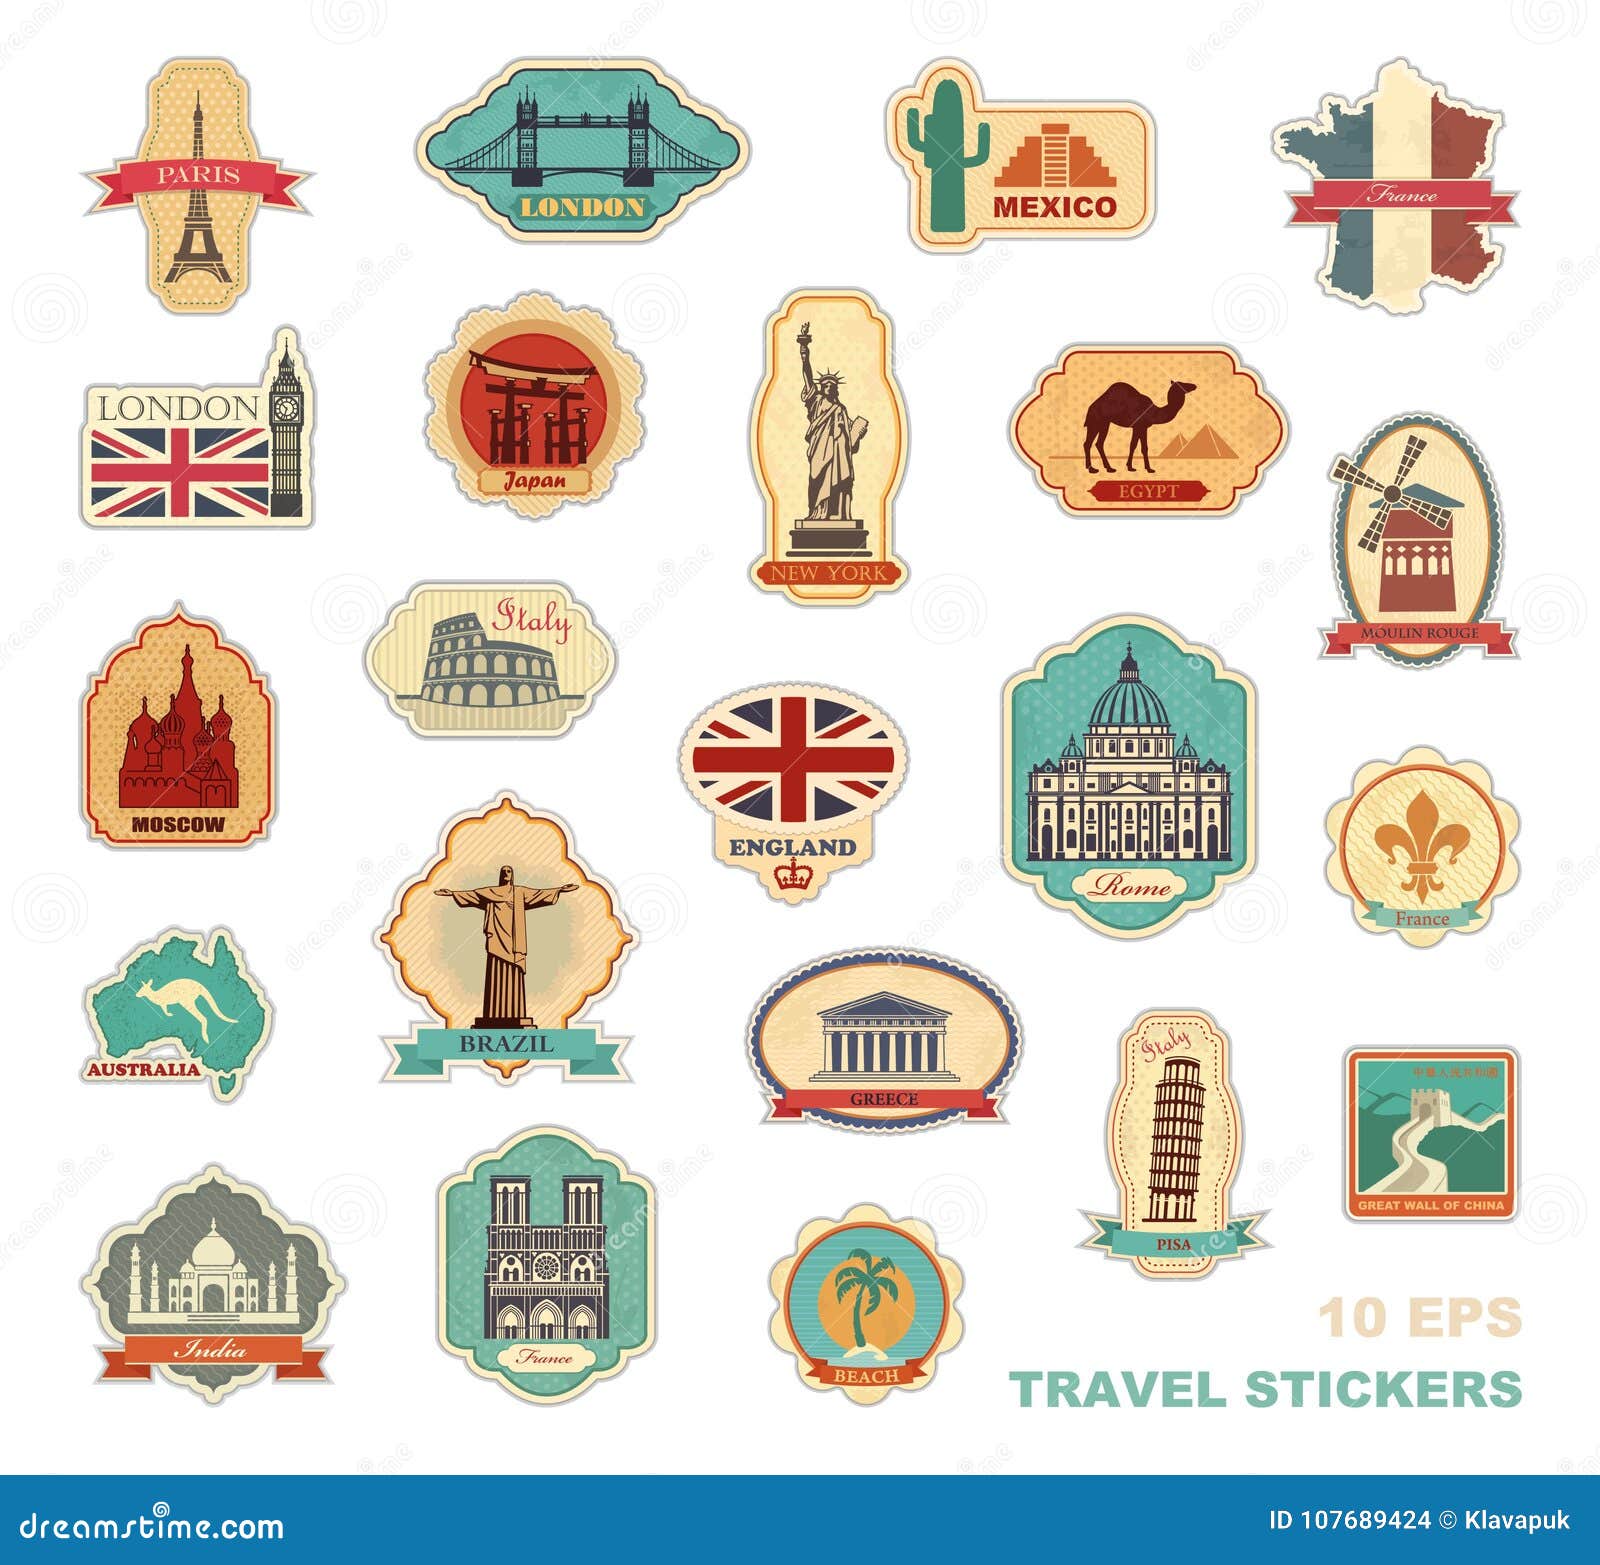 https://thumbs.dreamstime.com/z/travel-stickers-symbols-different-countries-labels-107689424.jpg